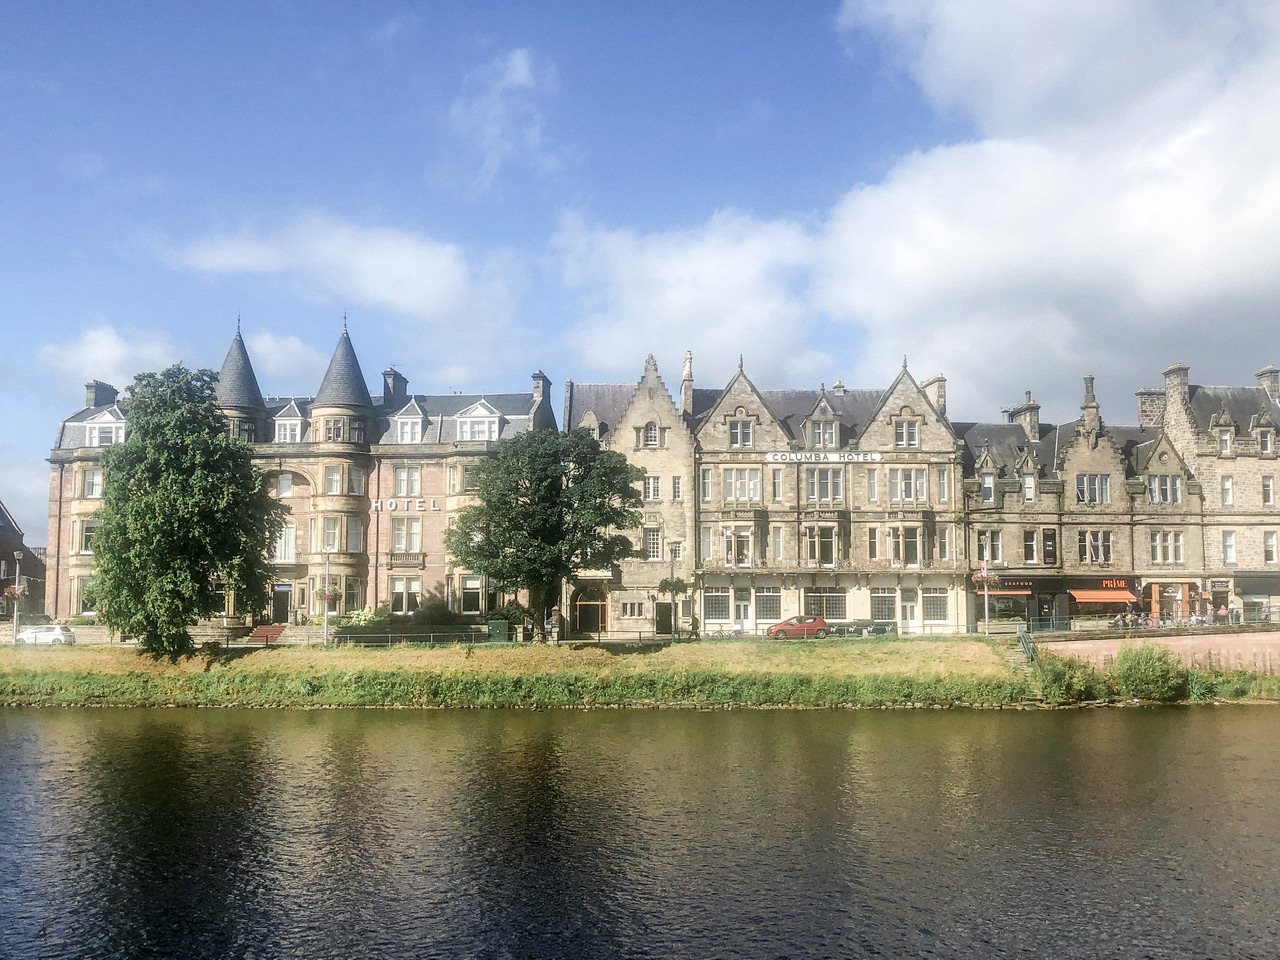 Sandstone buildings viewed across river ness in Inverness